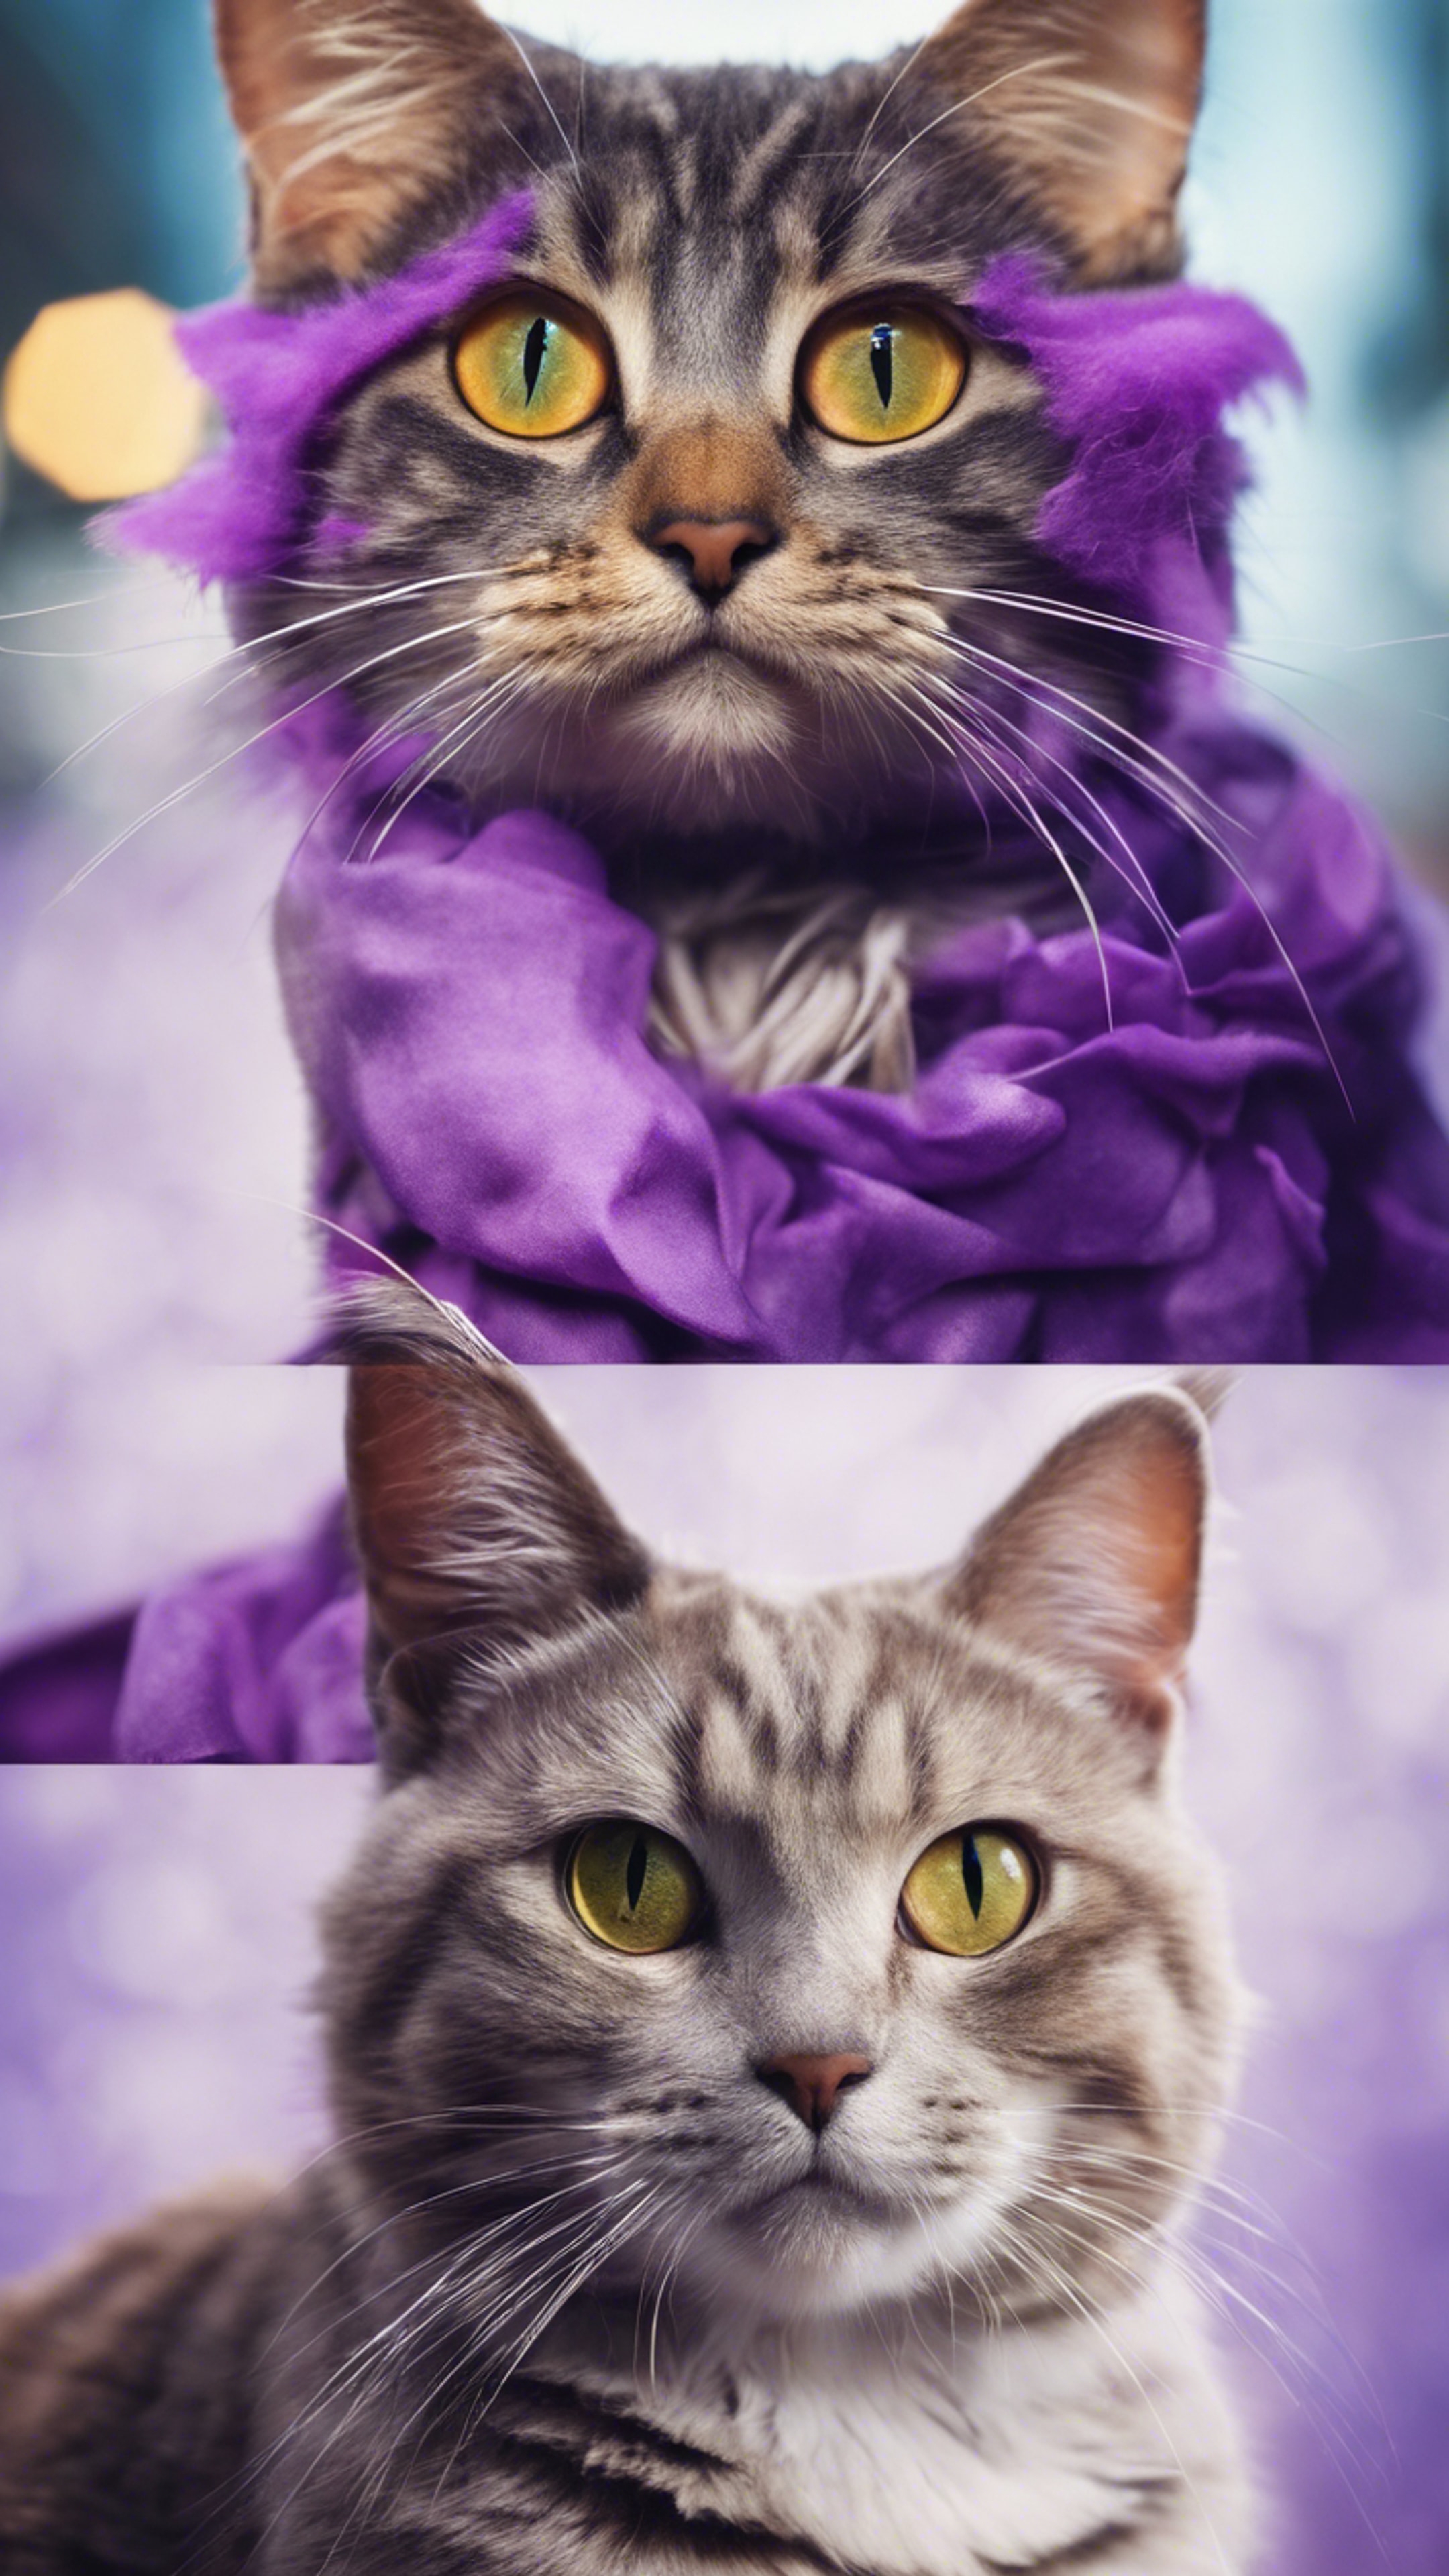 A playful collage showcasing various breeds of cats, all with unusual purple fur. Tapeta[3a46628192d3463088be]